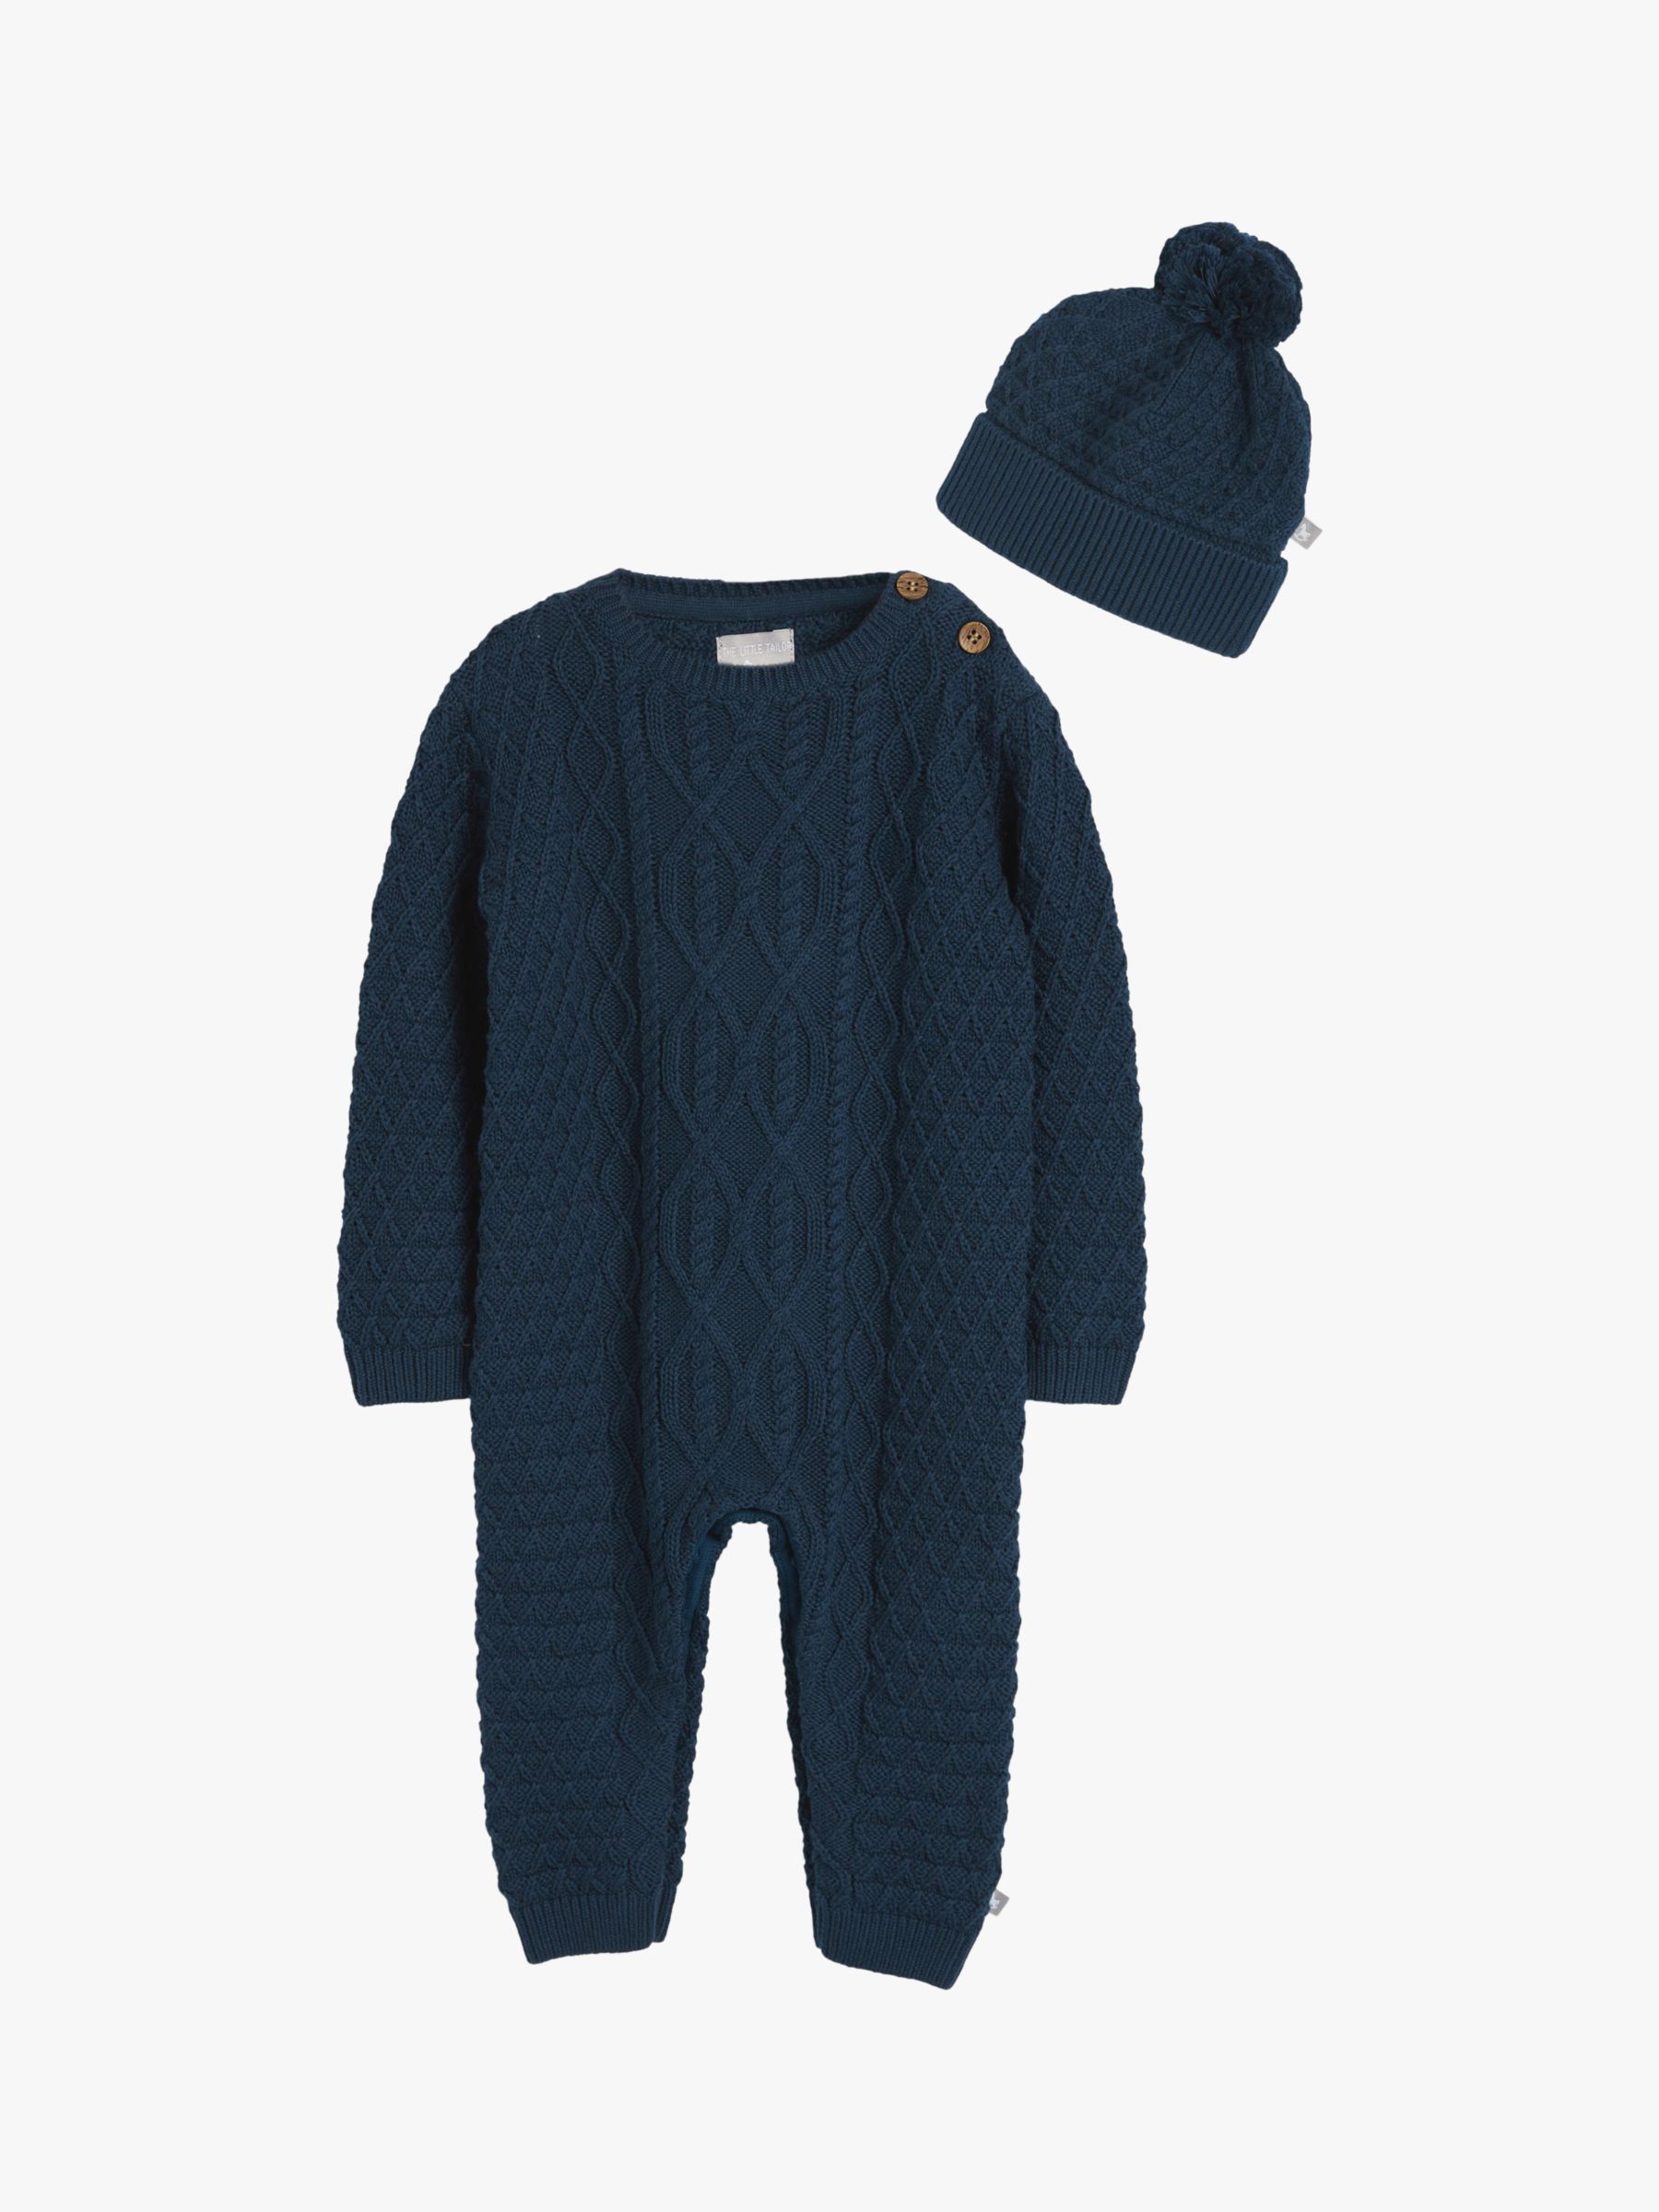 Buy The Little Tailor Baby Two Piece Romper & Hat Set Online at johnlewis.com